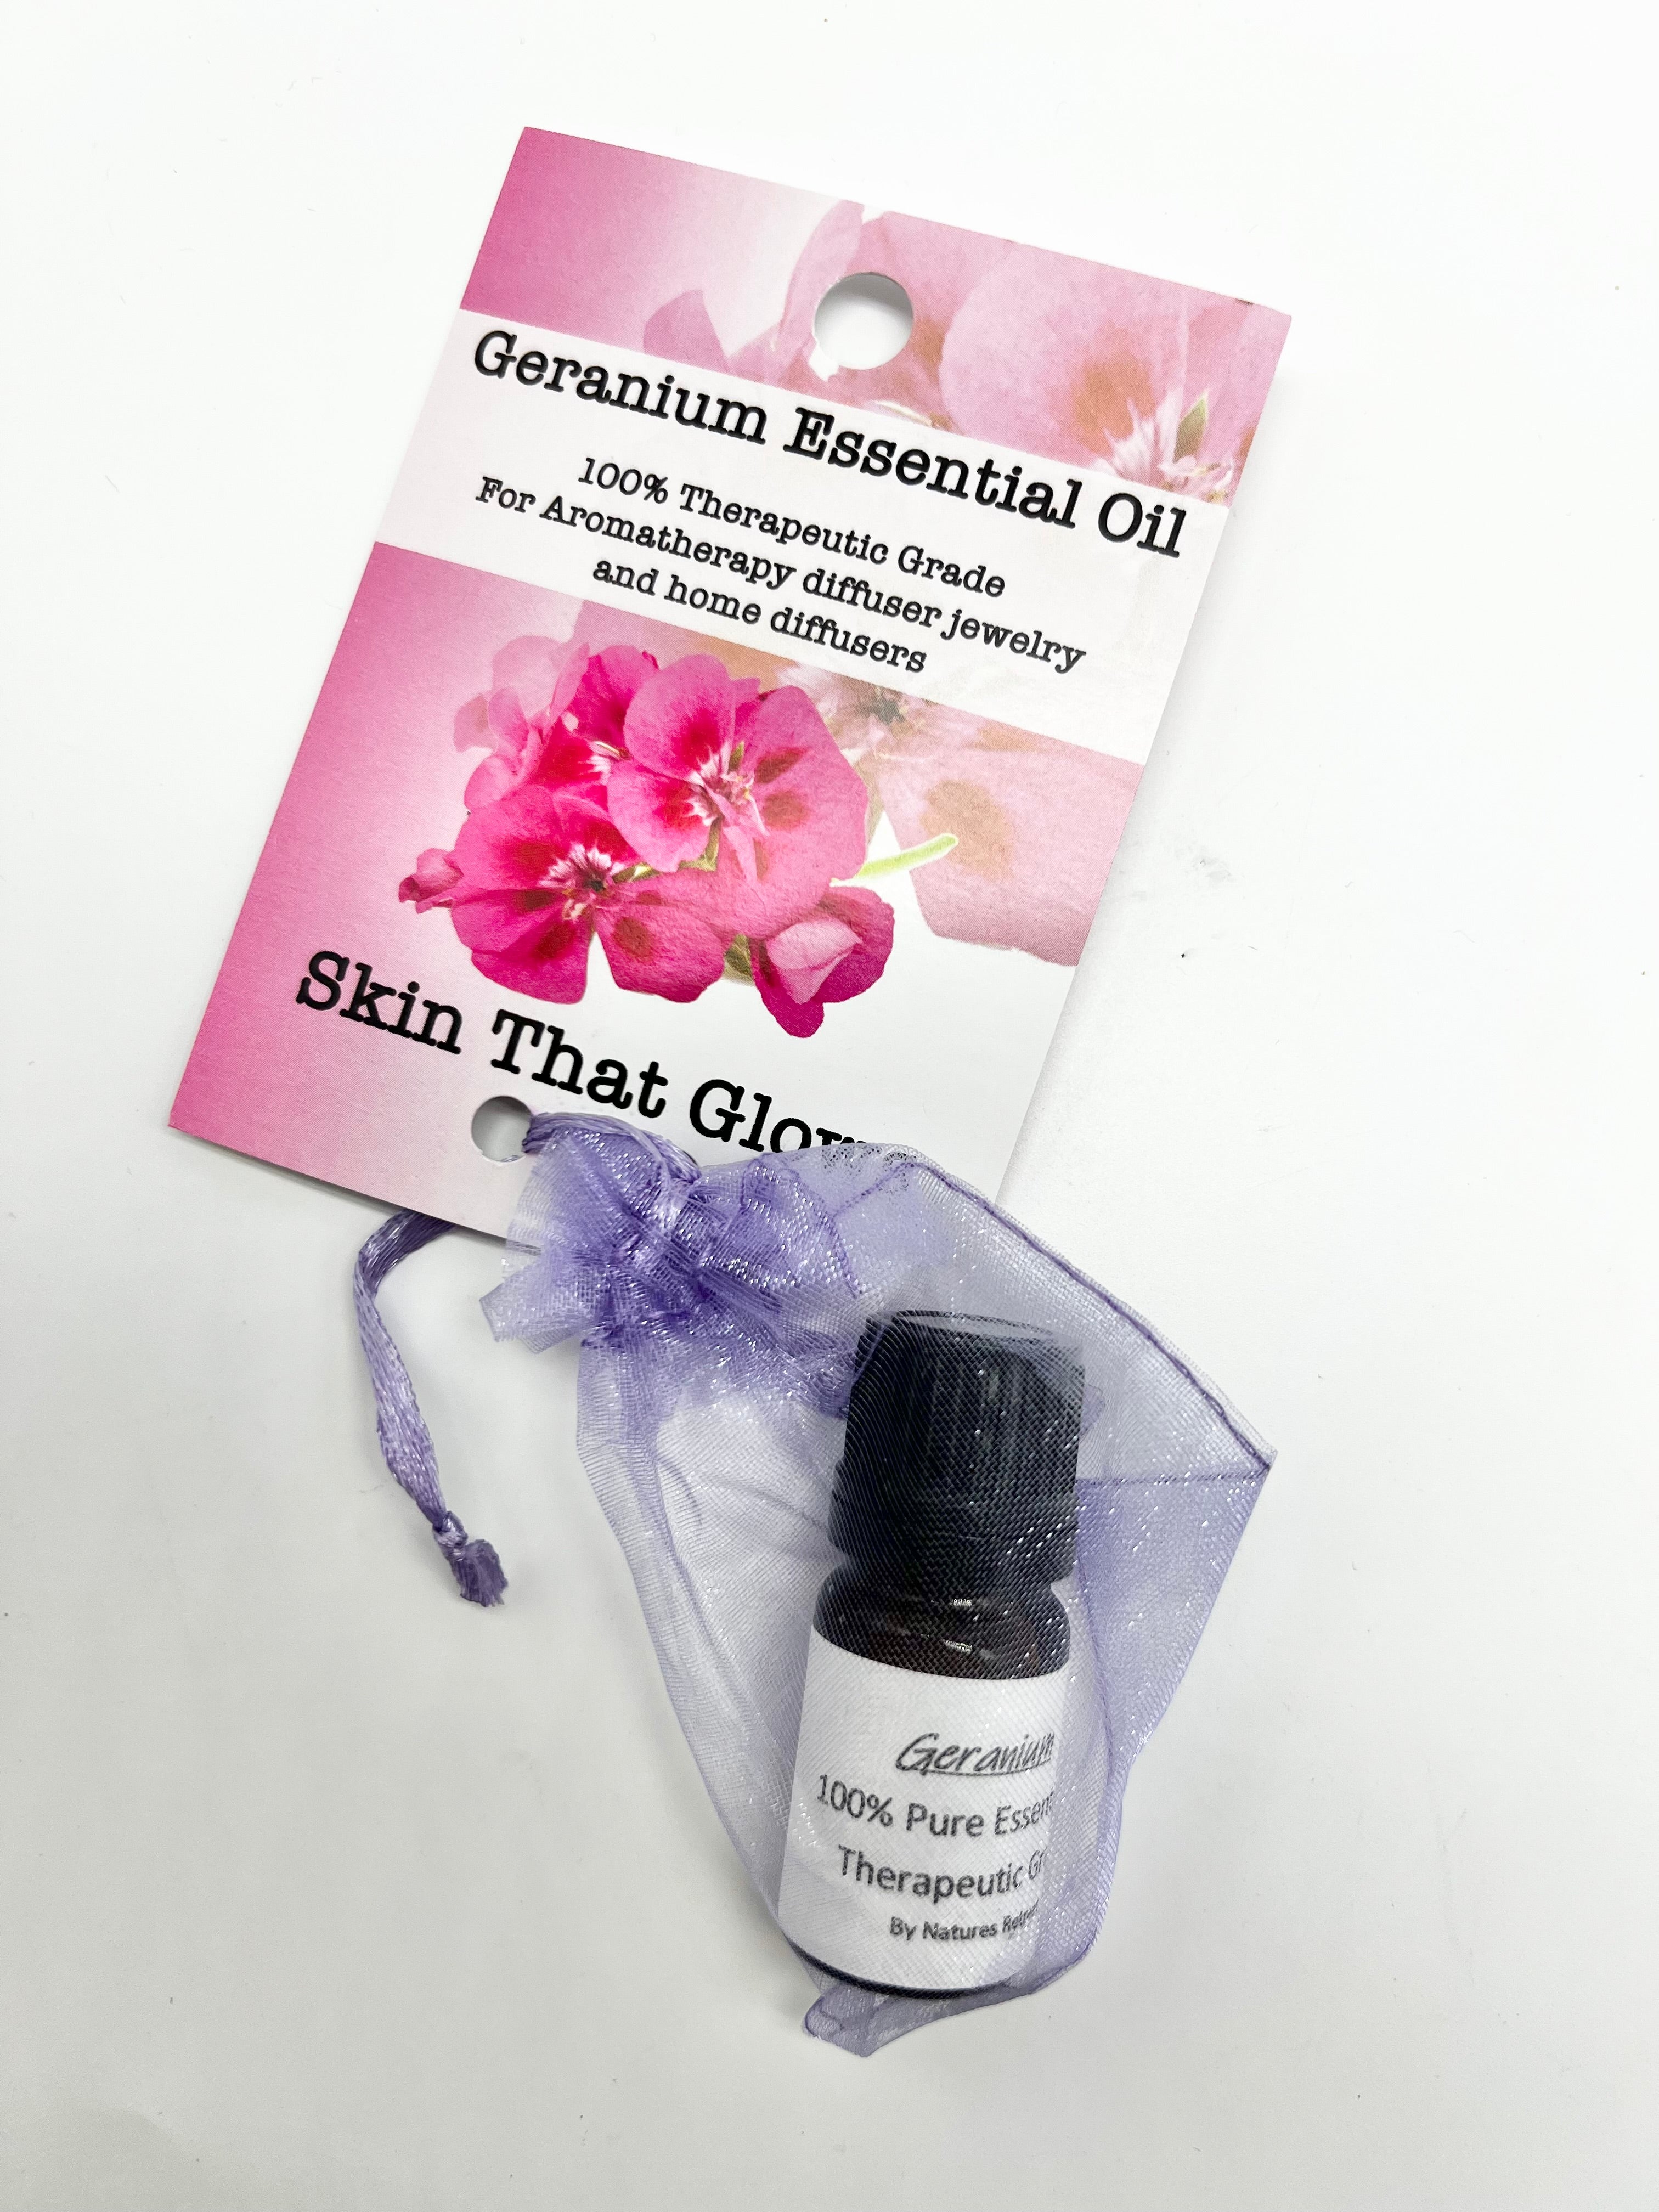 Essential Oils-340 Other Accessories-Bridge Connections-Heathered Boho Boutique, Women's Fashion and Accessories in Palmetto, FL